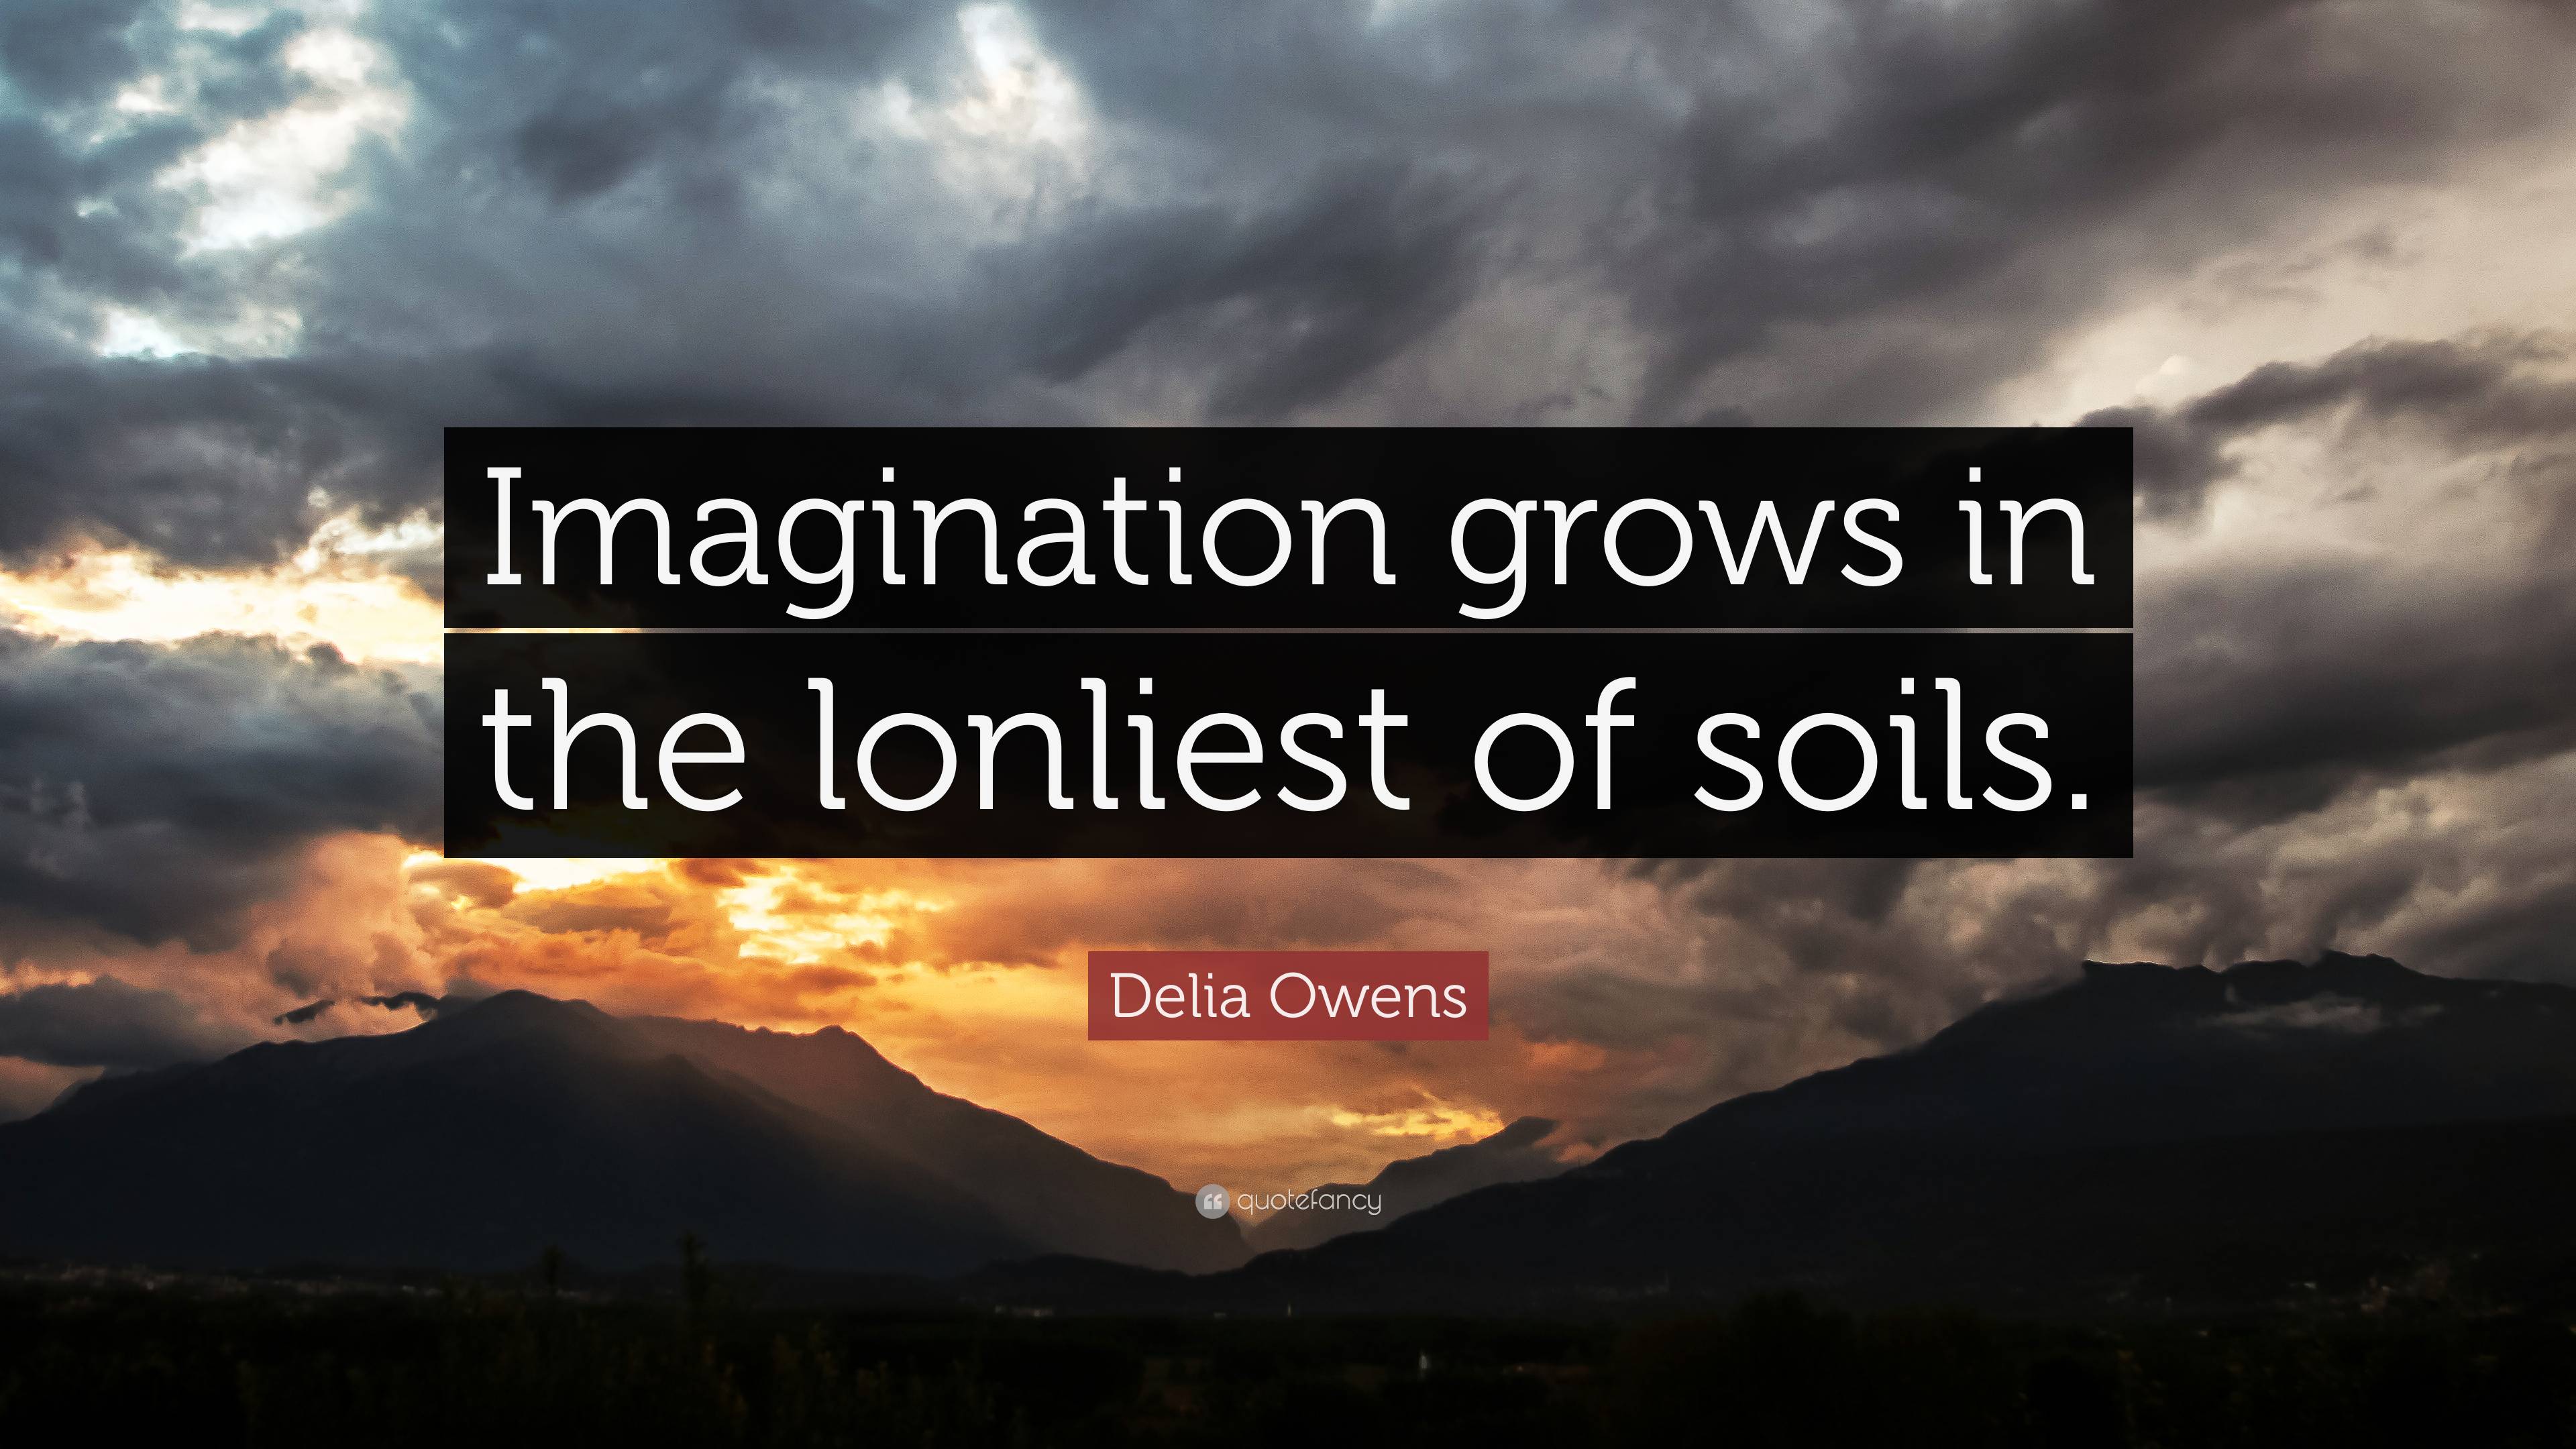 Delia Owens Quote: “Imagination grows in the lonliest of soils.”